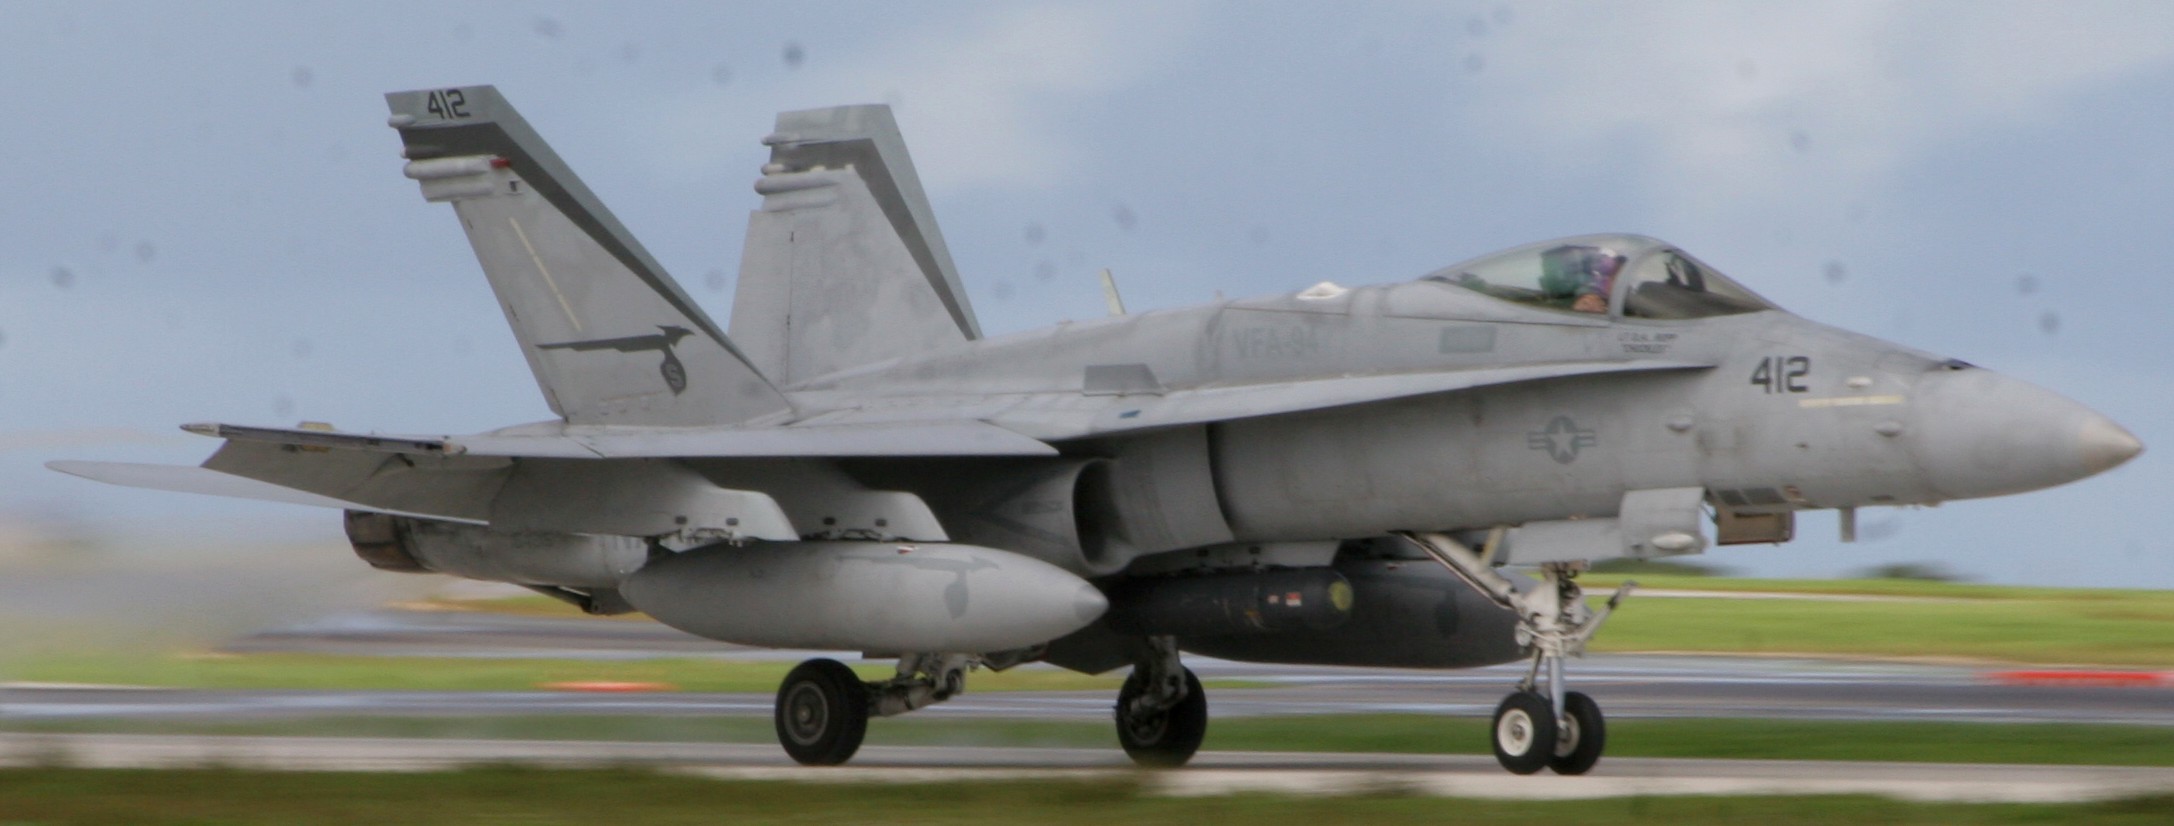 vfa-94 mighty shrikes strike fighter squadron f/a-18c hornet us navy andersen afb guam 09